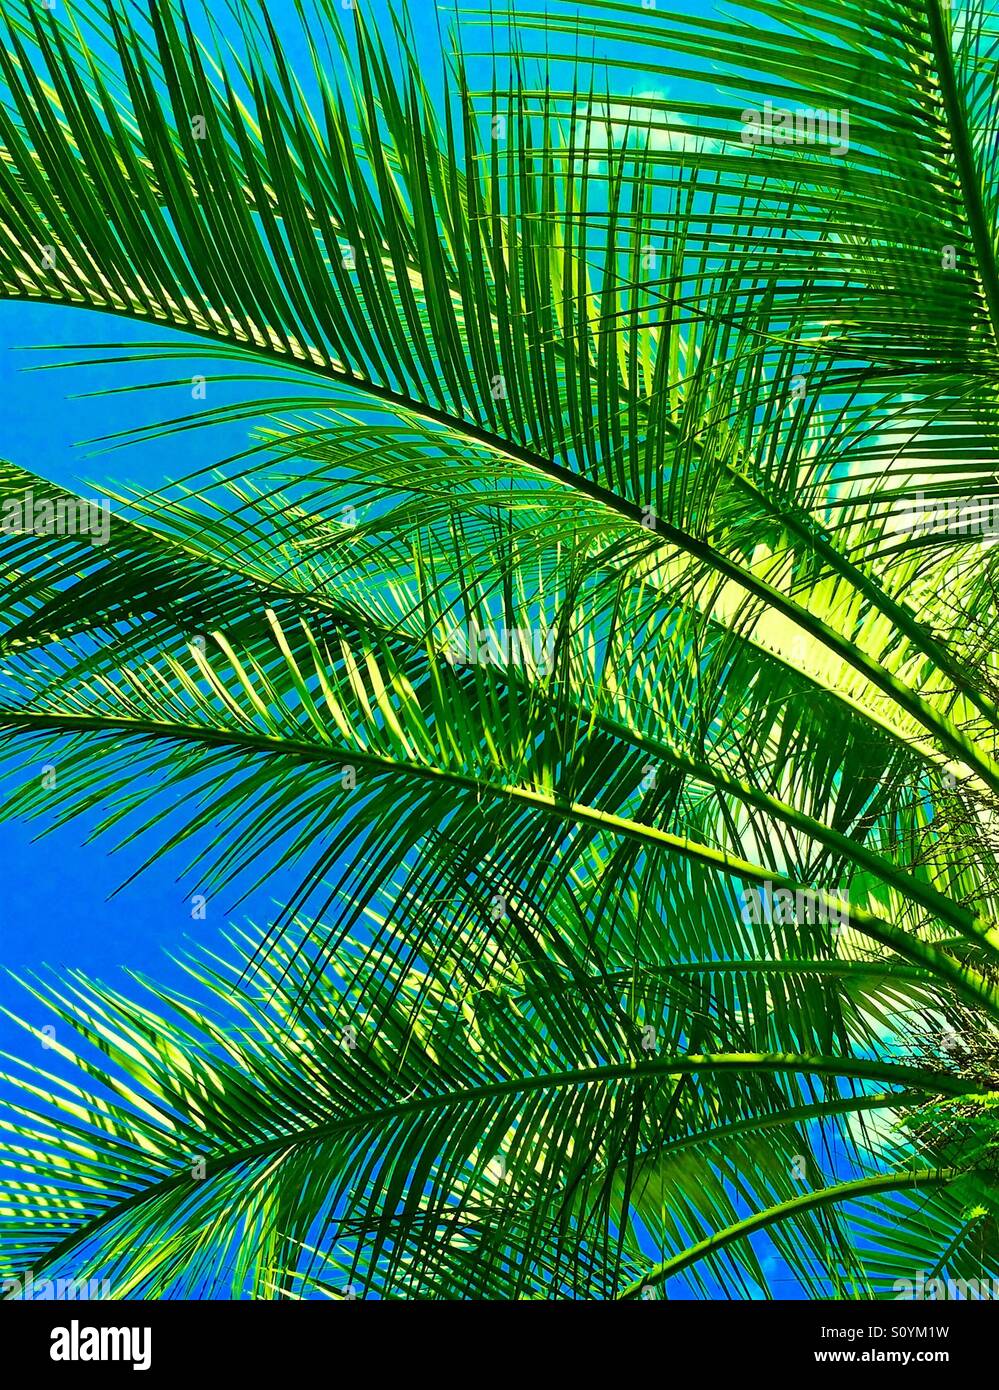 Lush green Palm fronds against a blue sky Stock Photo